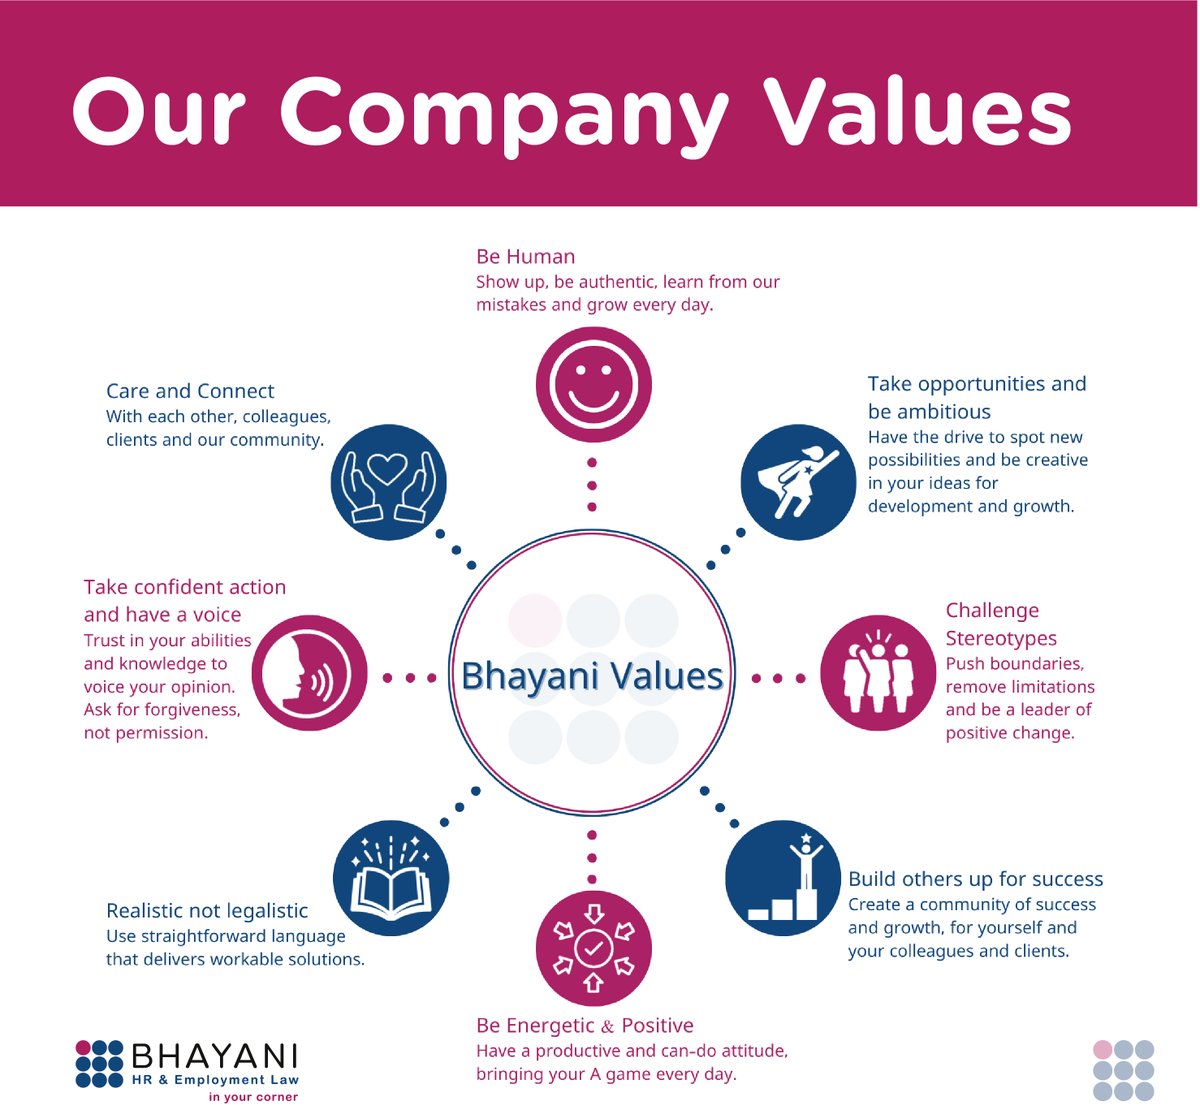 Our Company Values 🌐 At Bhayani HR & Employment Law, our actions are guided by our core values. Take a look at what sets us apart and drives our commitment to excellence. 🌐 bhayanilaw.co.uk 📞 Call us: 0333 888 1360 #Values #TeamSpirit #BhayaniValues